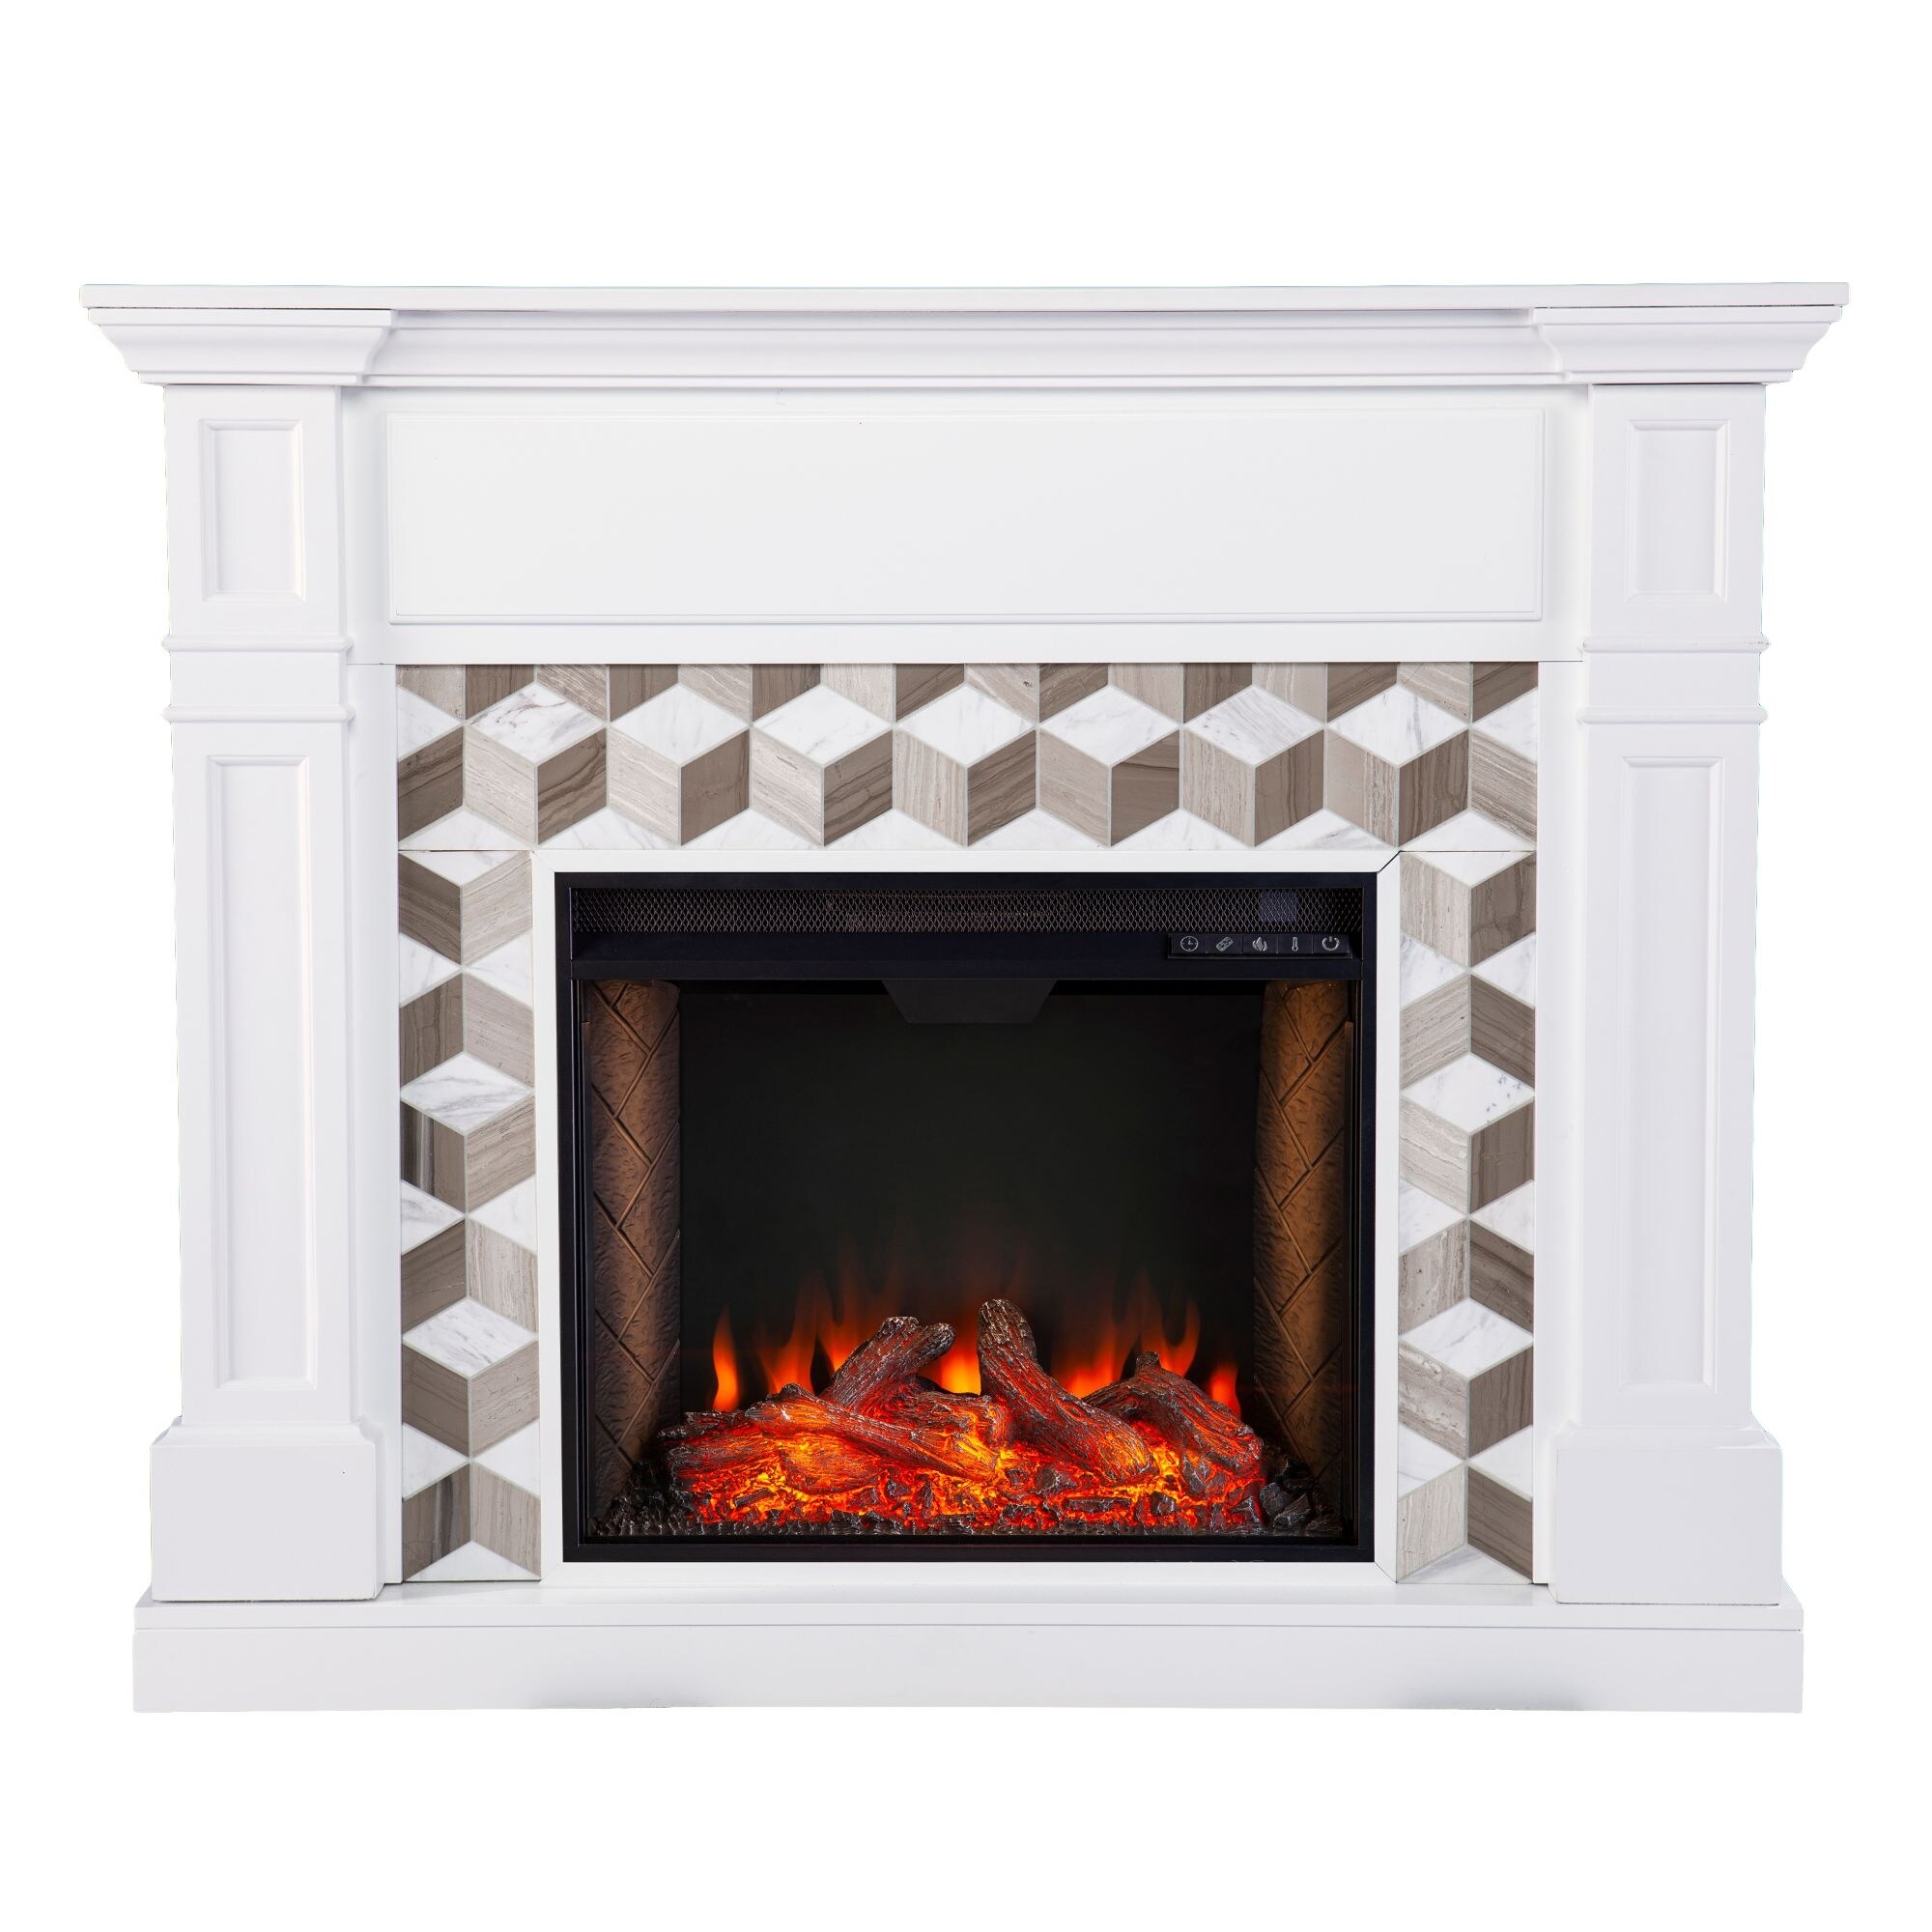 Southern Enterprises 48 inch White and Brown Alexa Smart Fireplace with Marble Surround